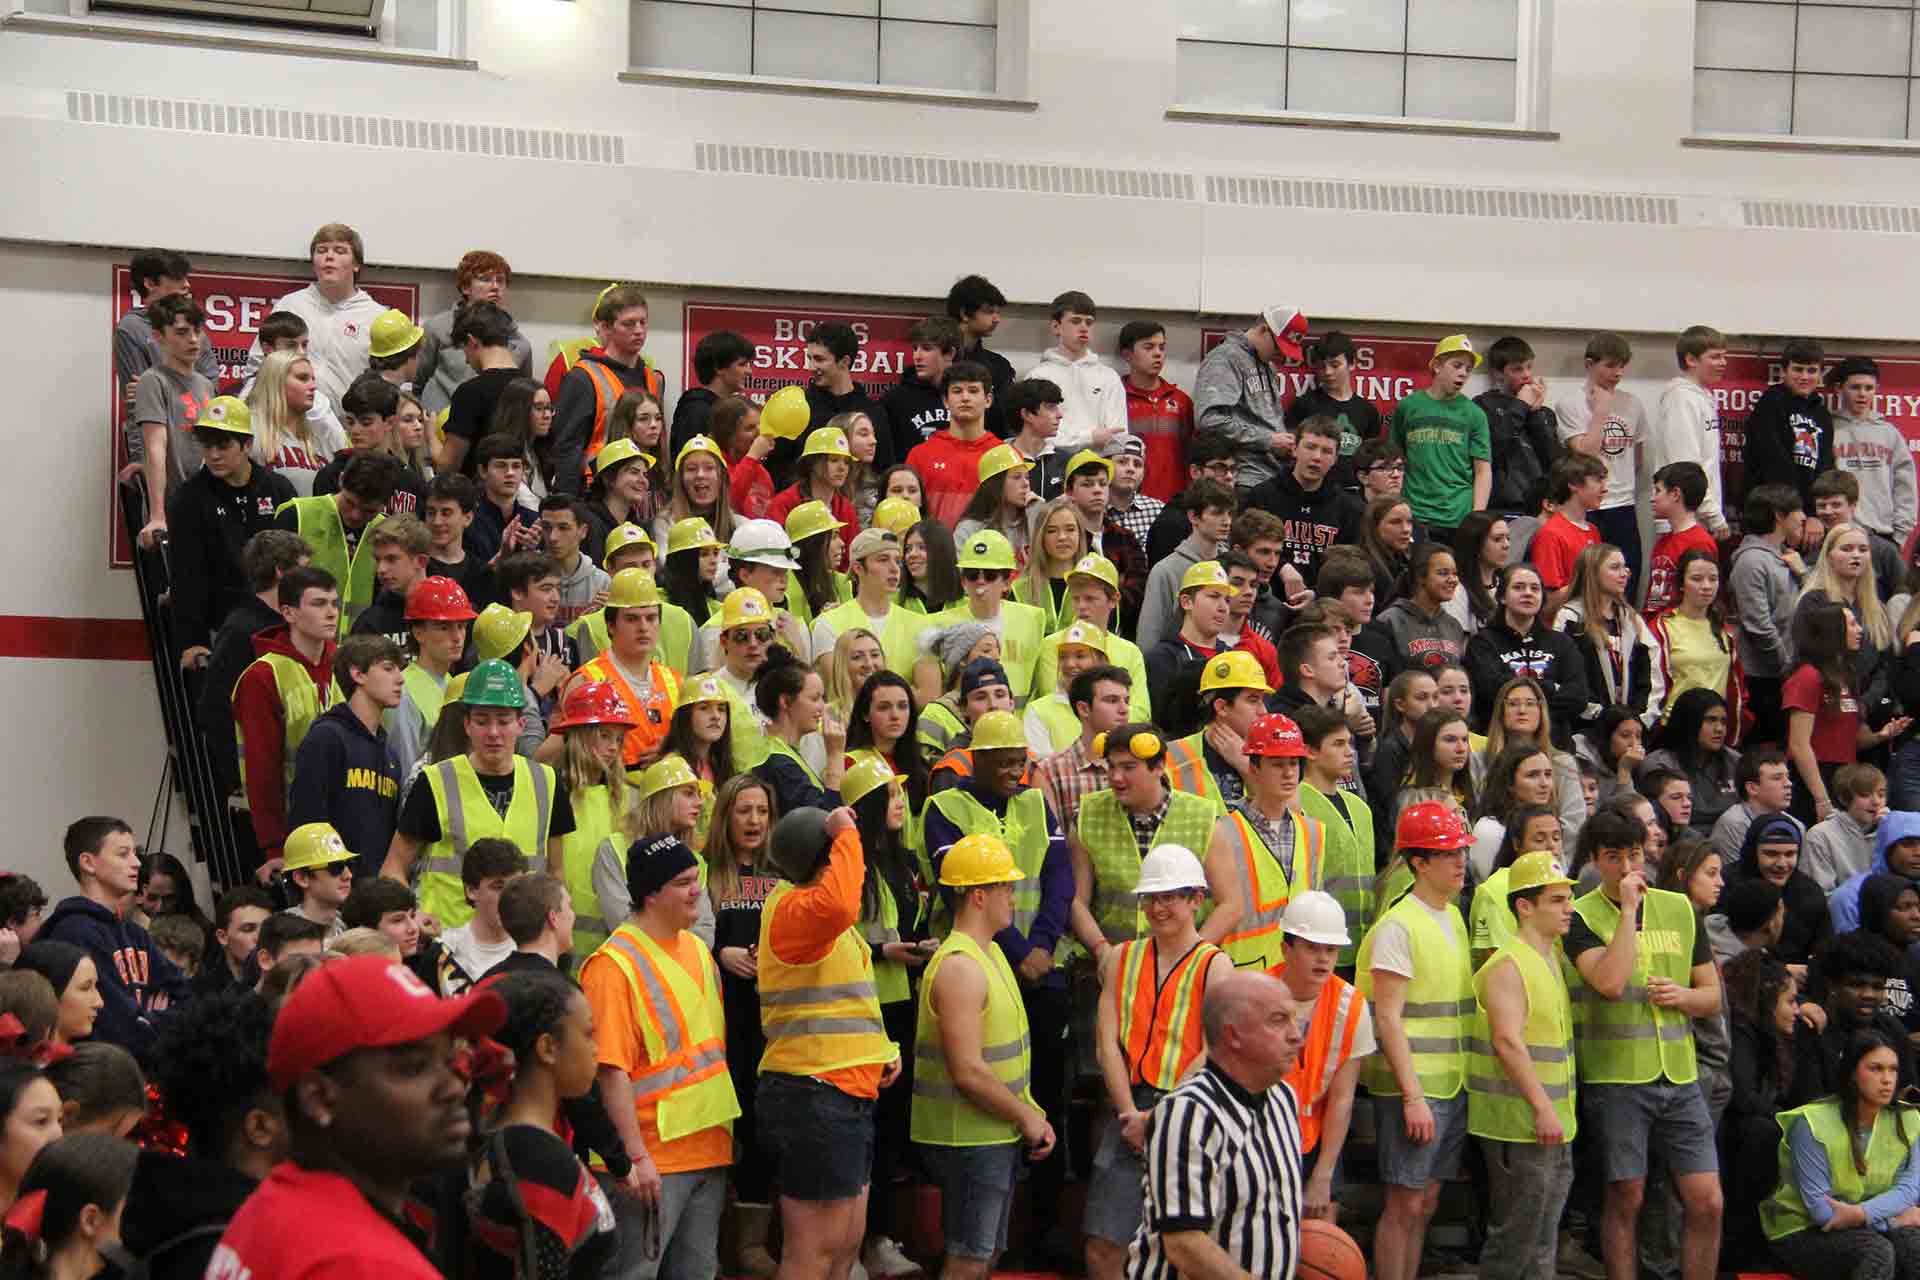 boys-basketball-vs-br-rice-students-wearing-construction-worker-outfits-in-bleachers